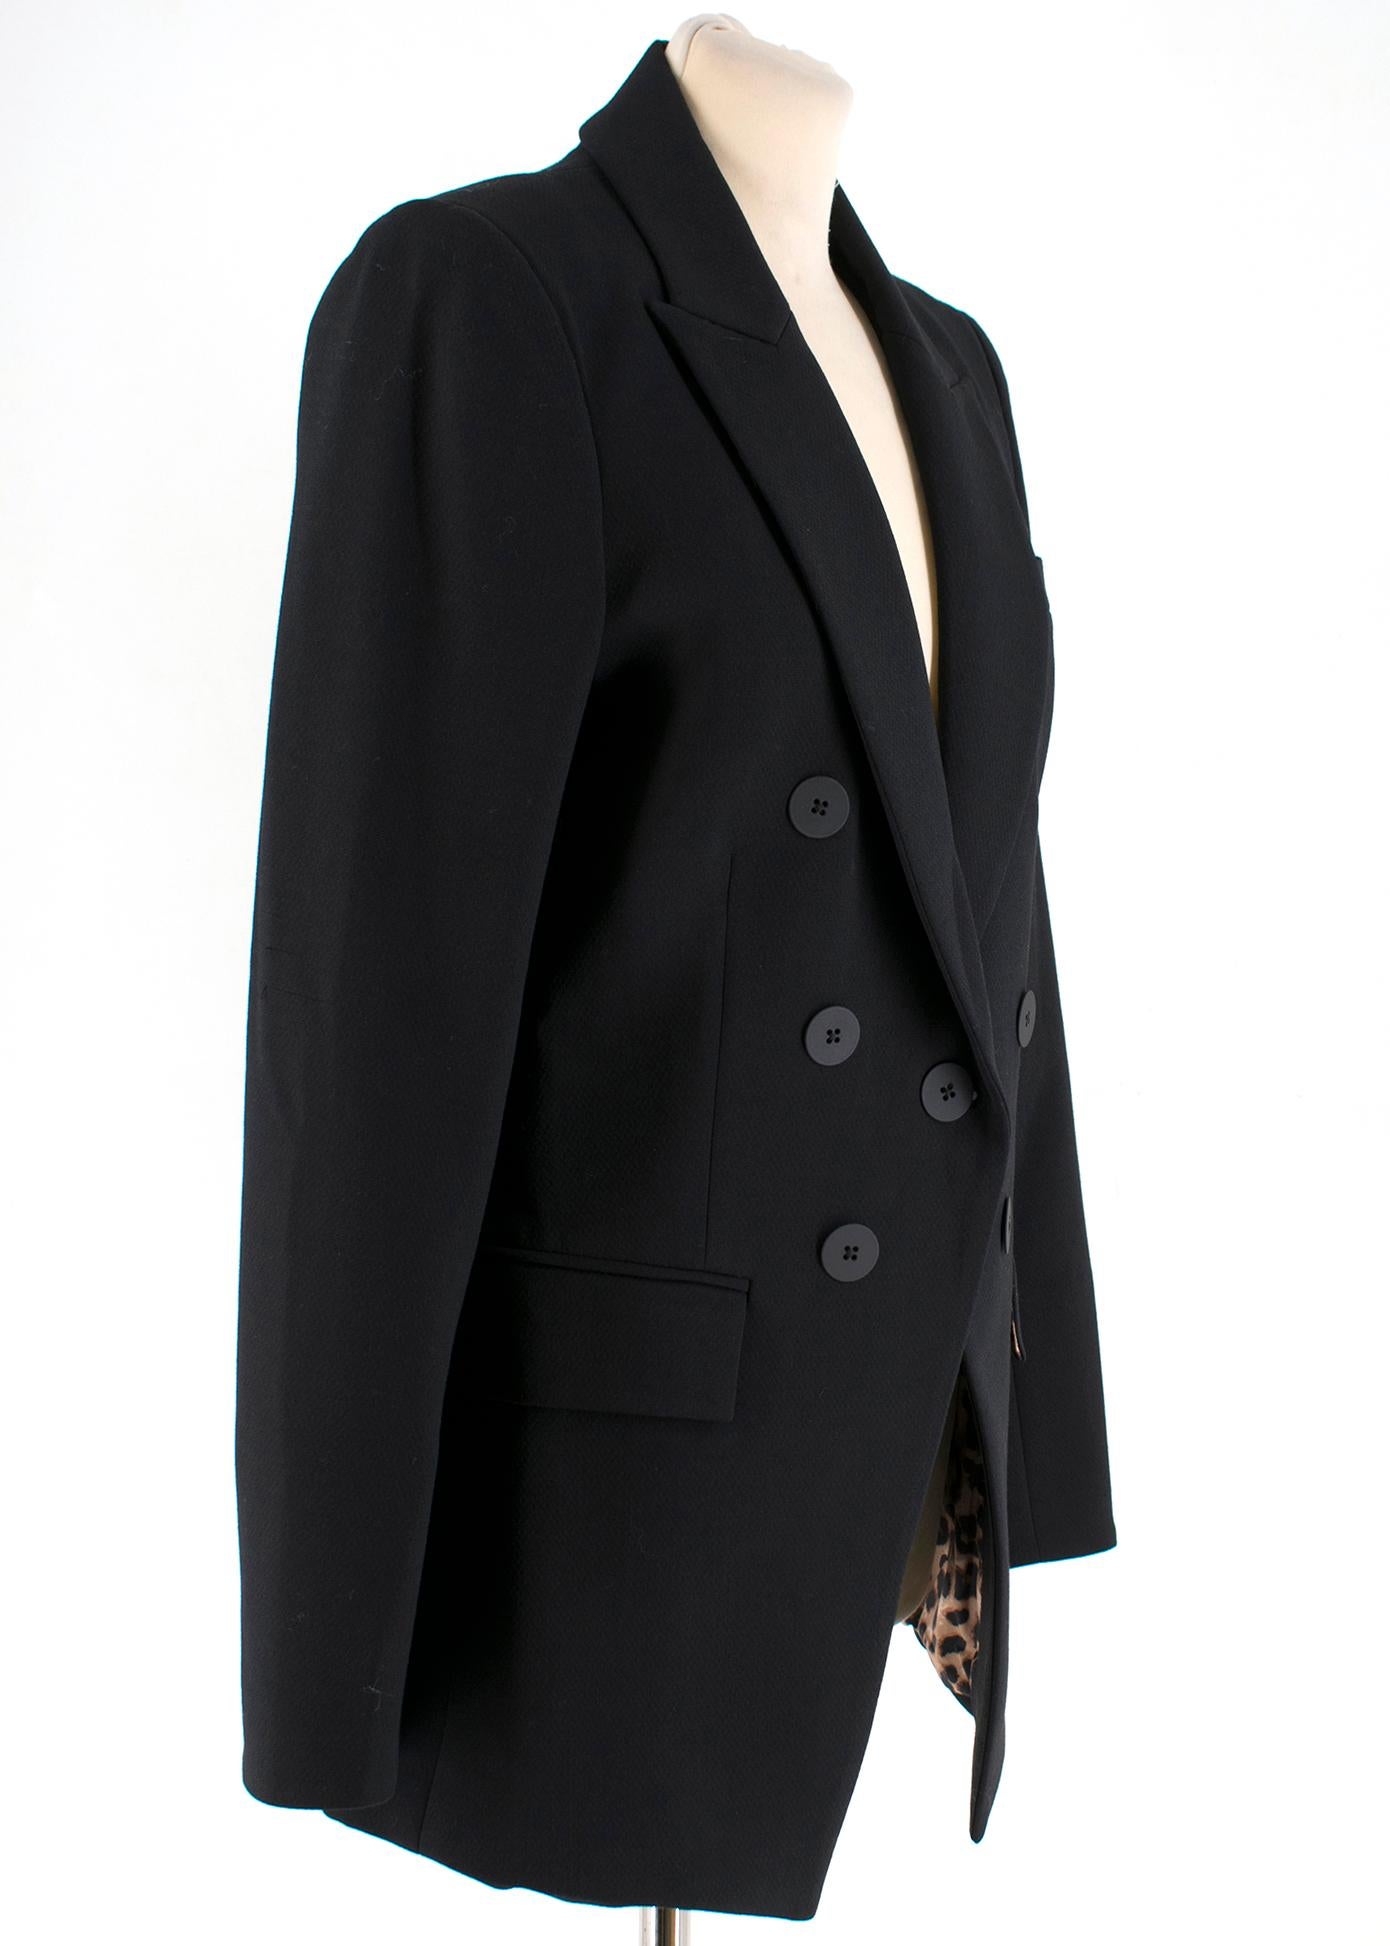 Veronica Beard black classic blazer featuring a double-breasted button front, peak lapels and flap pockets at the sides. RRP £690 

- Long sleeves
- Cuff buttons
- Chest pocket
- Structured shoulders
- Leopard print lining
- A front button